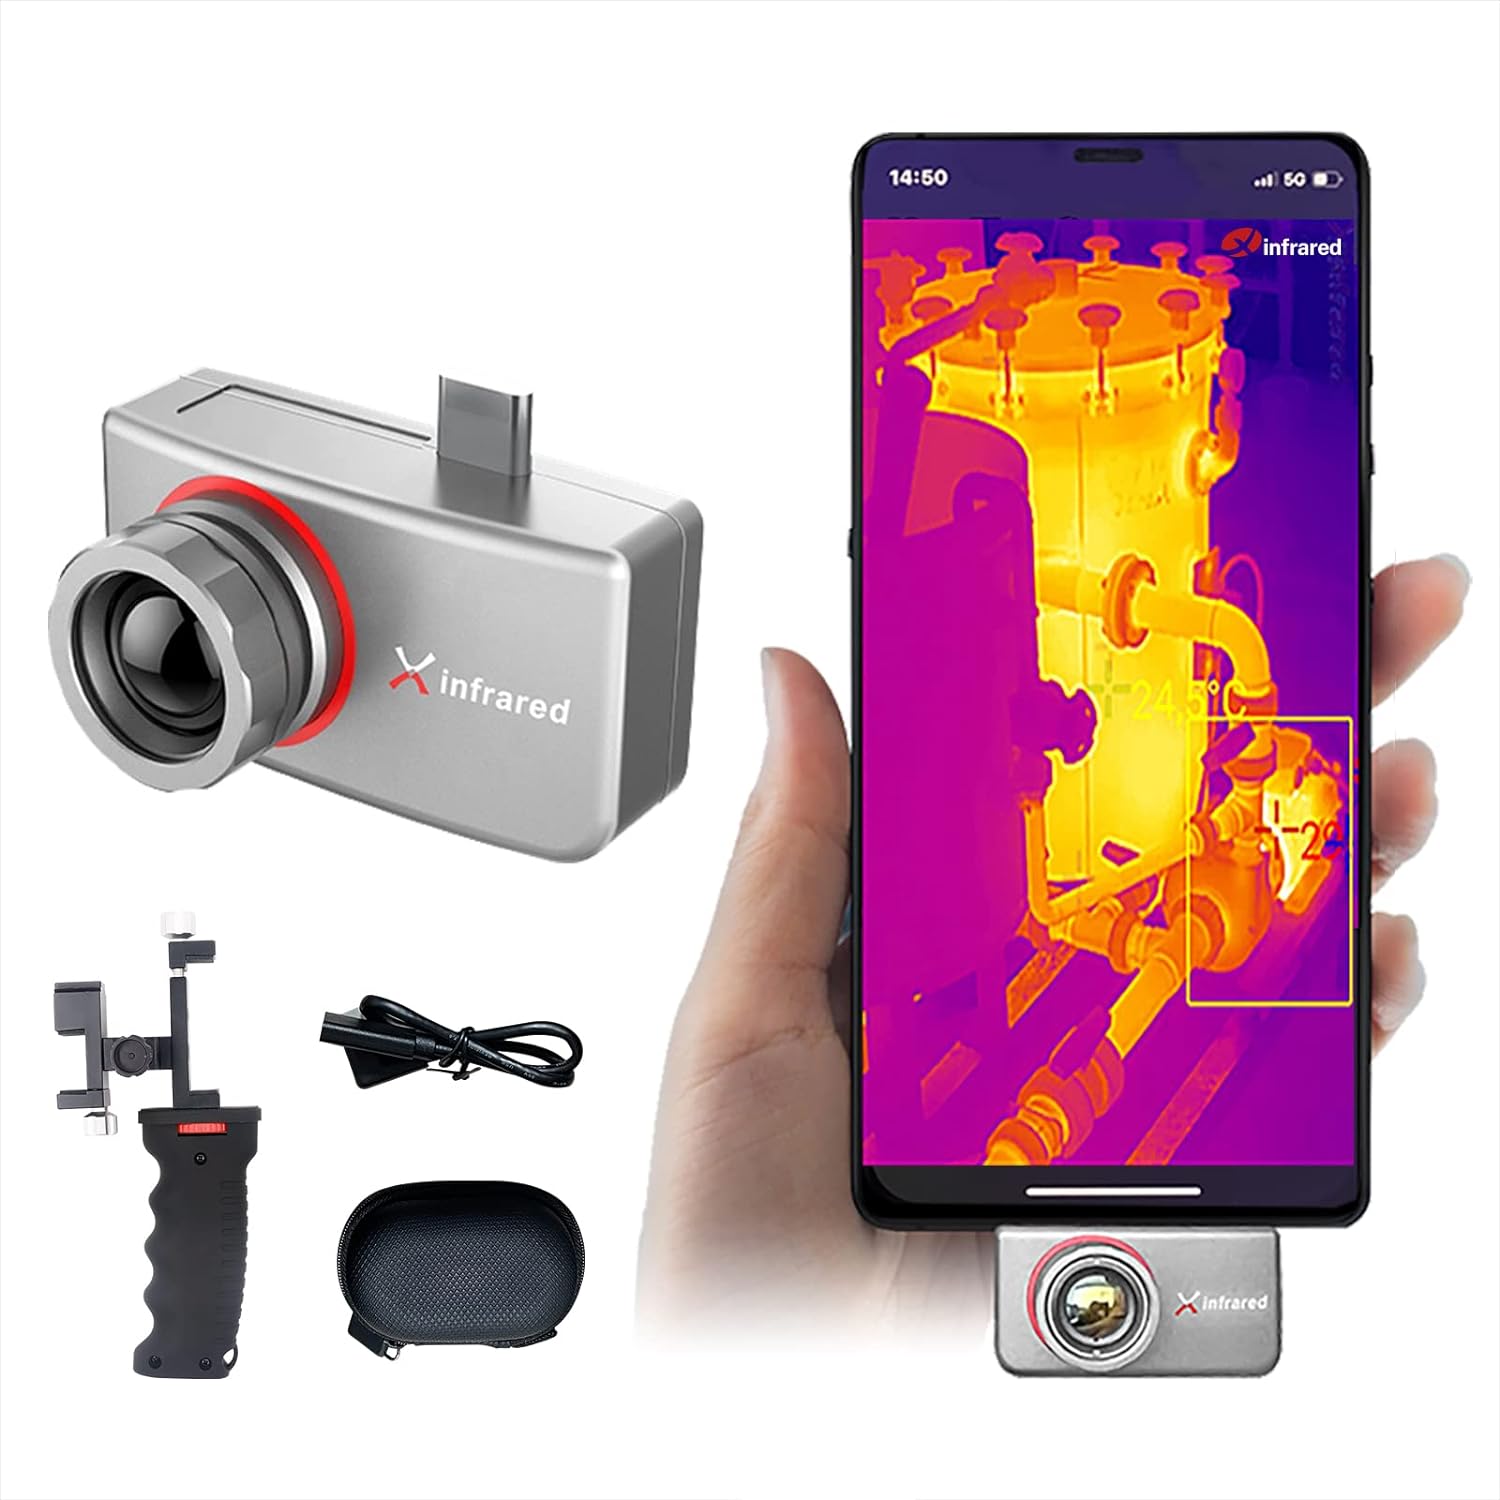 Xinfrared T3S World’s Clearest Thermal Camera